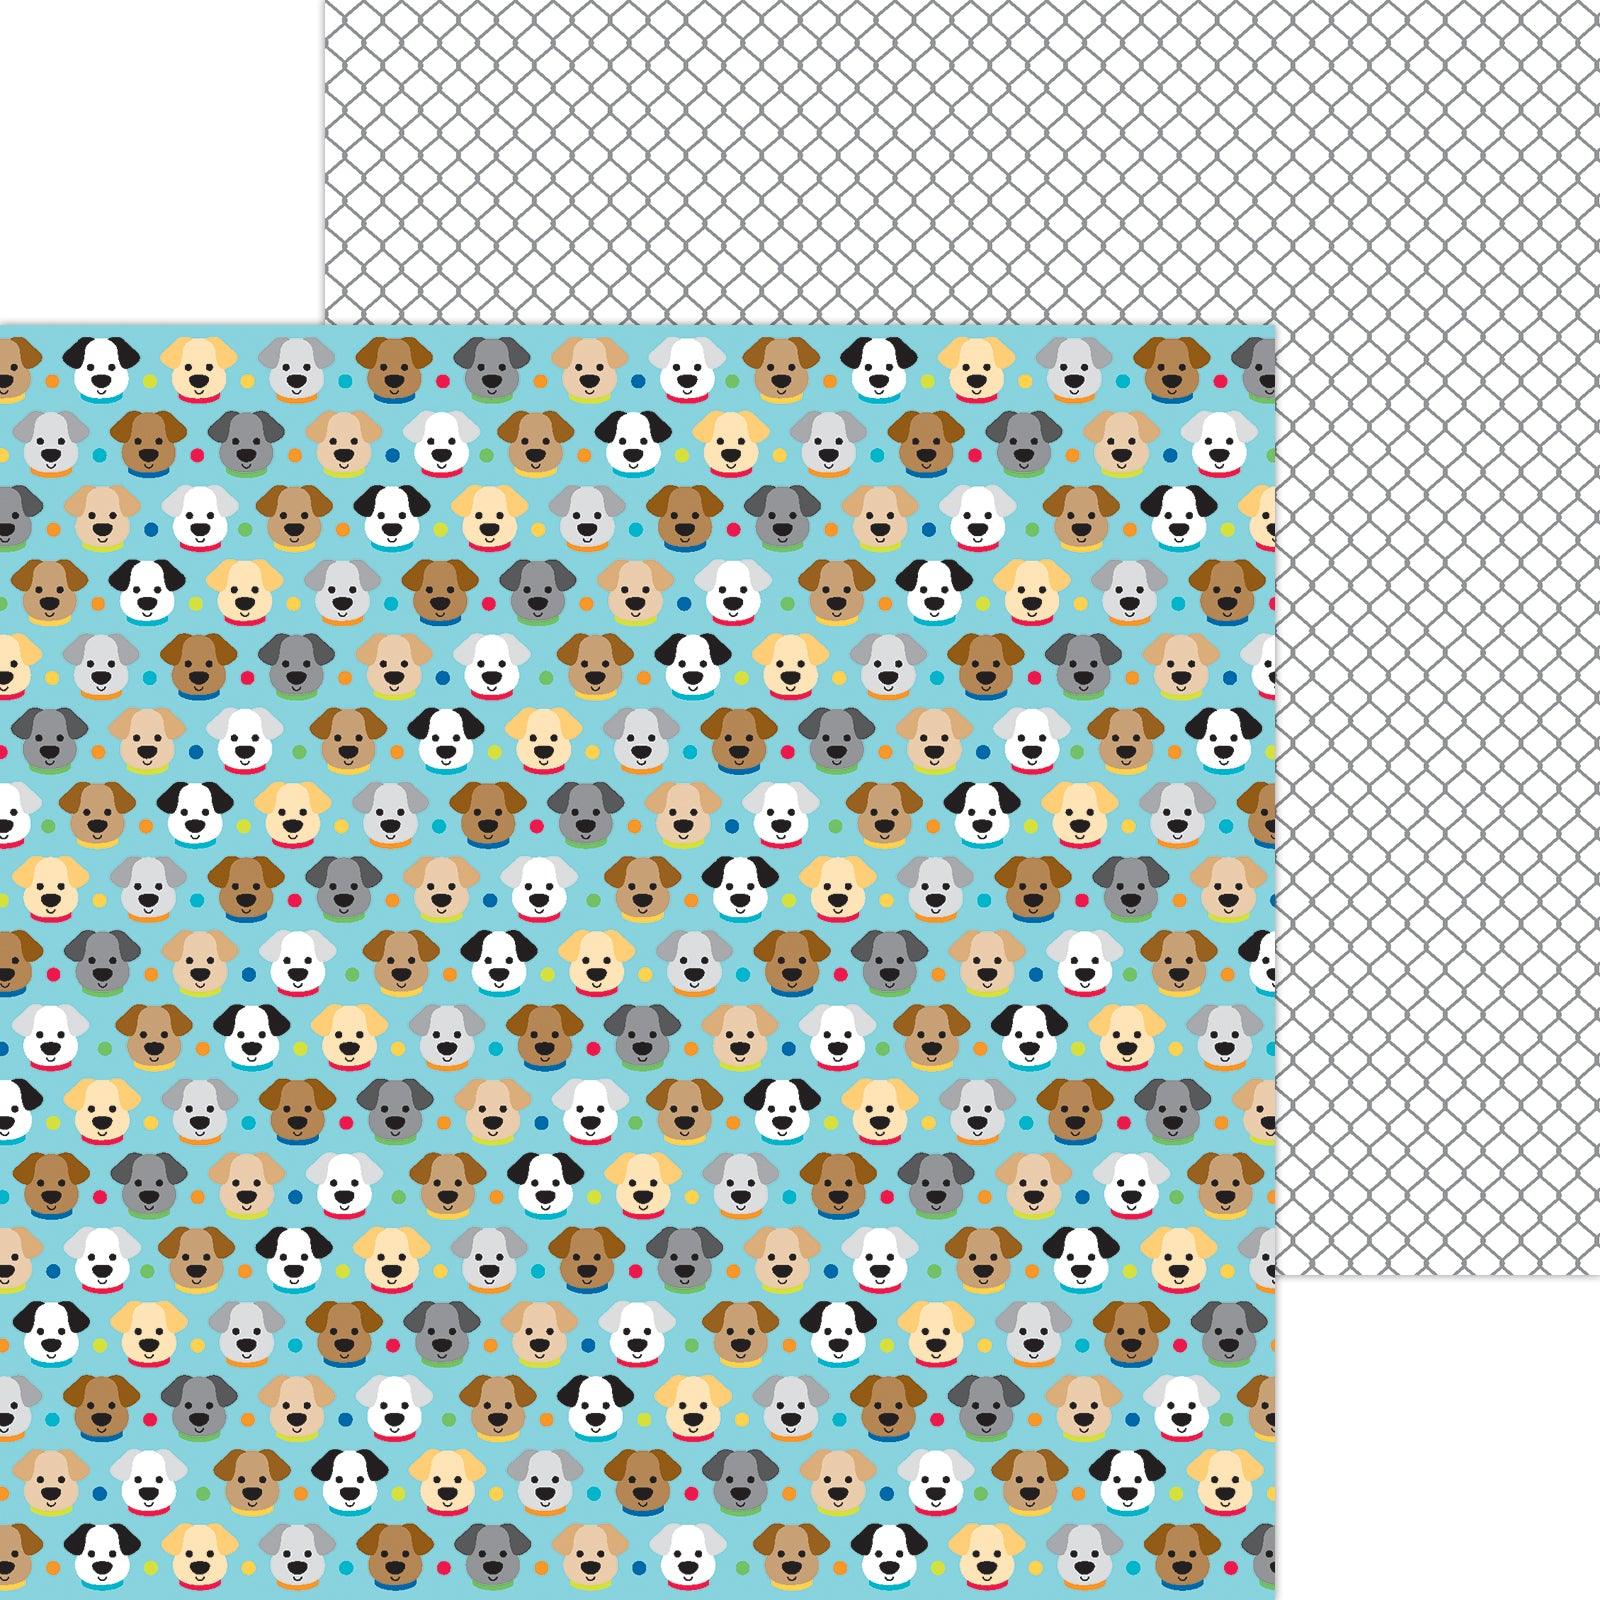 Doggone Cute Collection Here Boy! 12 x 12 Double-Sided Scrapbook Paper by Doodlebug Design - Scrapbook Supply Companies